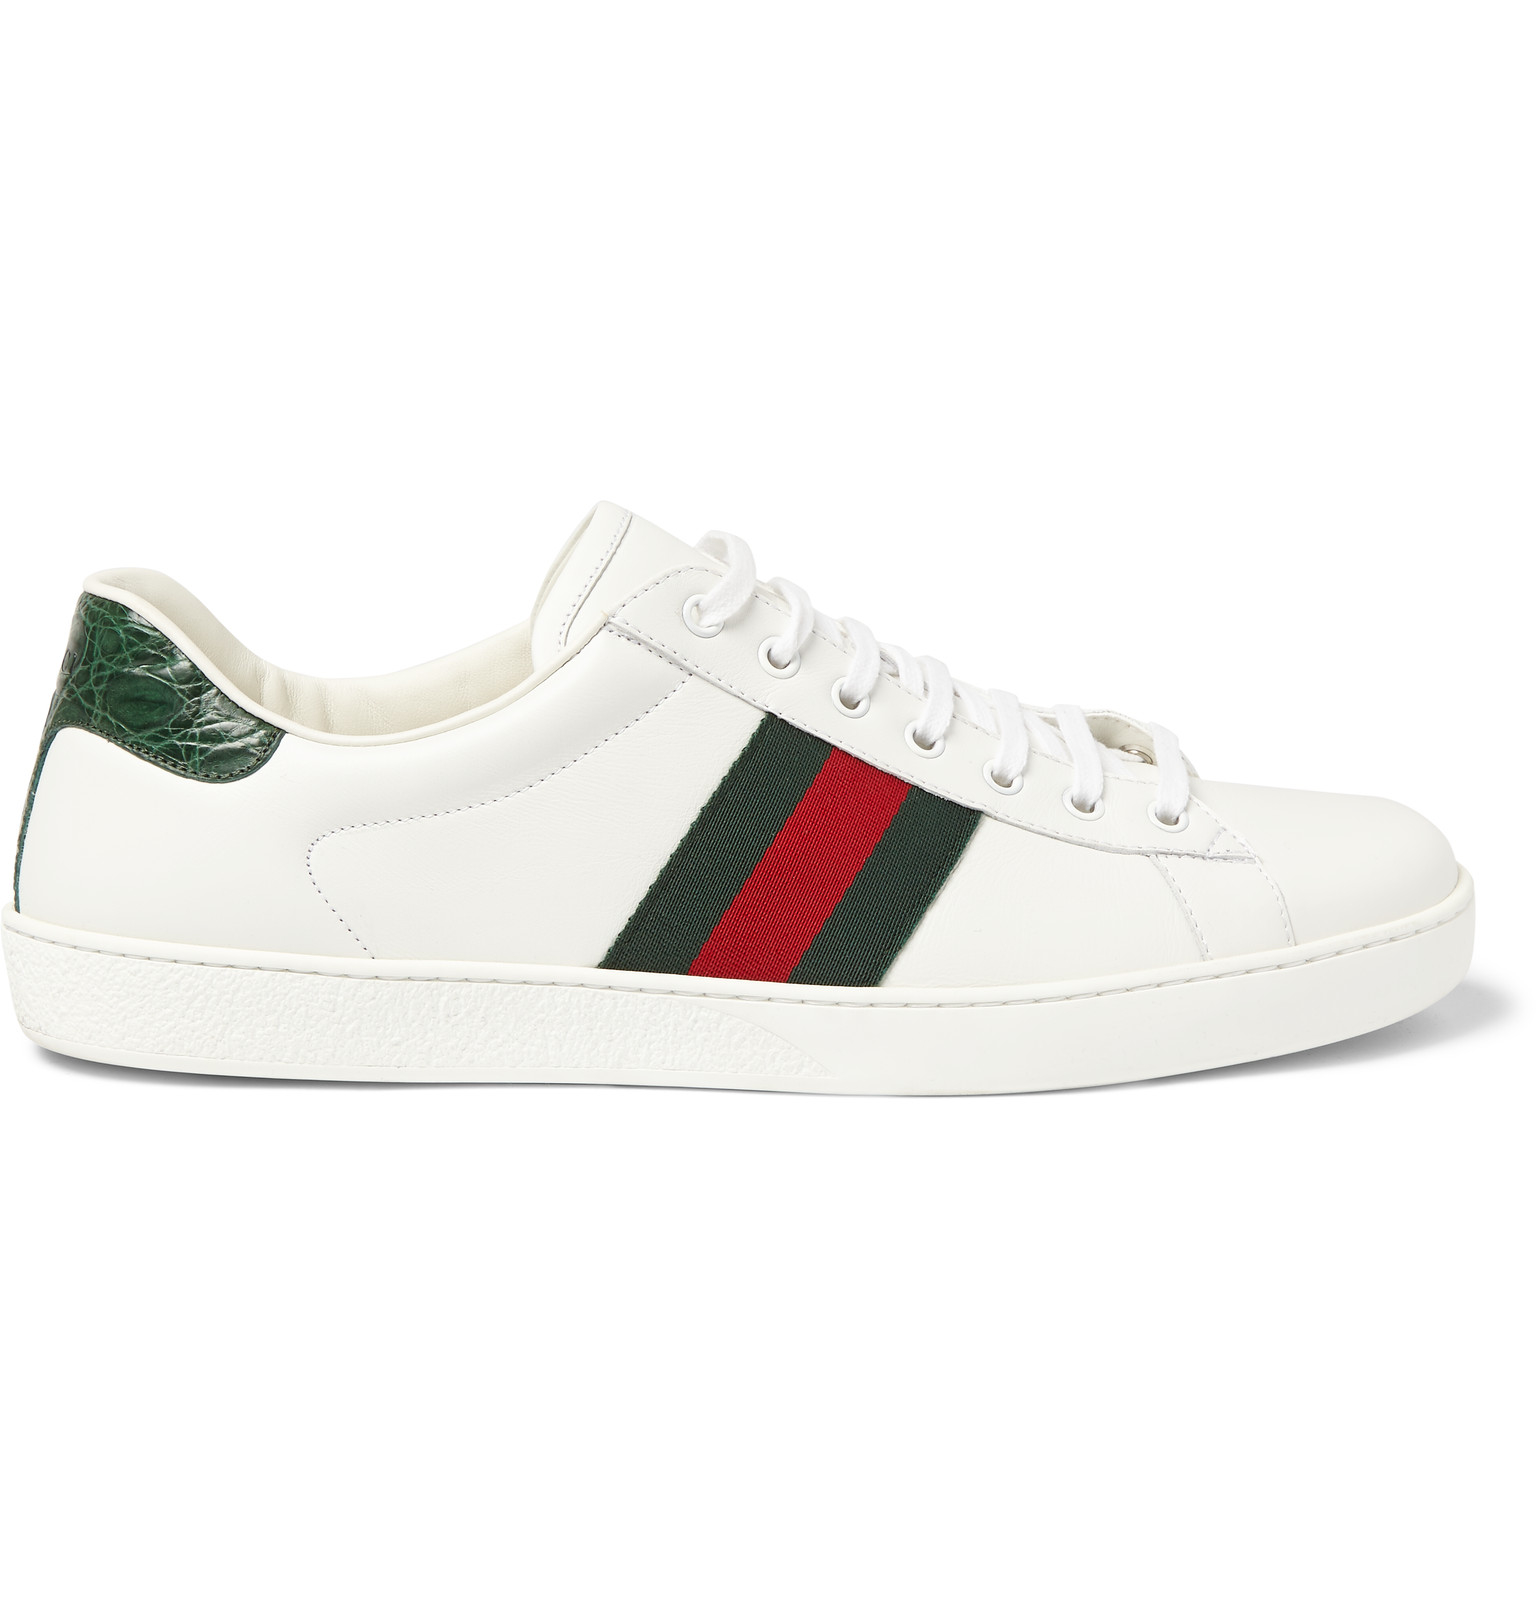 Gucci Ace Crocodile-trimmed Leather Sneakers in White for Men - Lyst